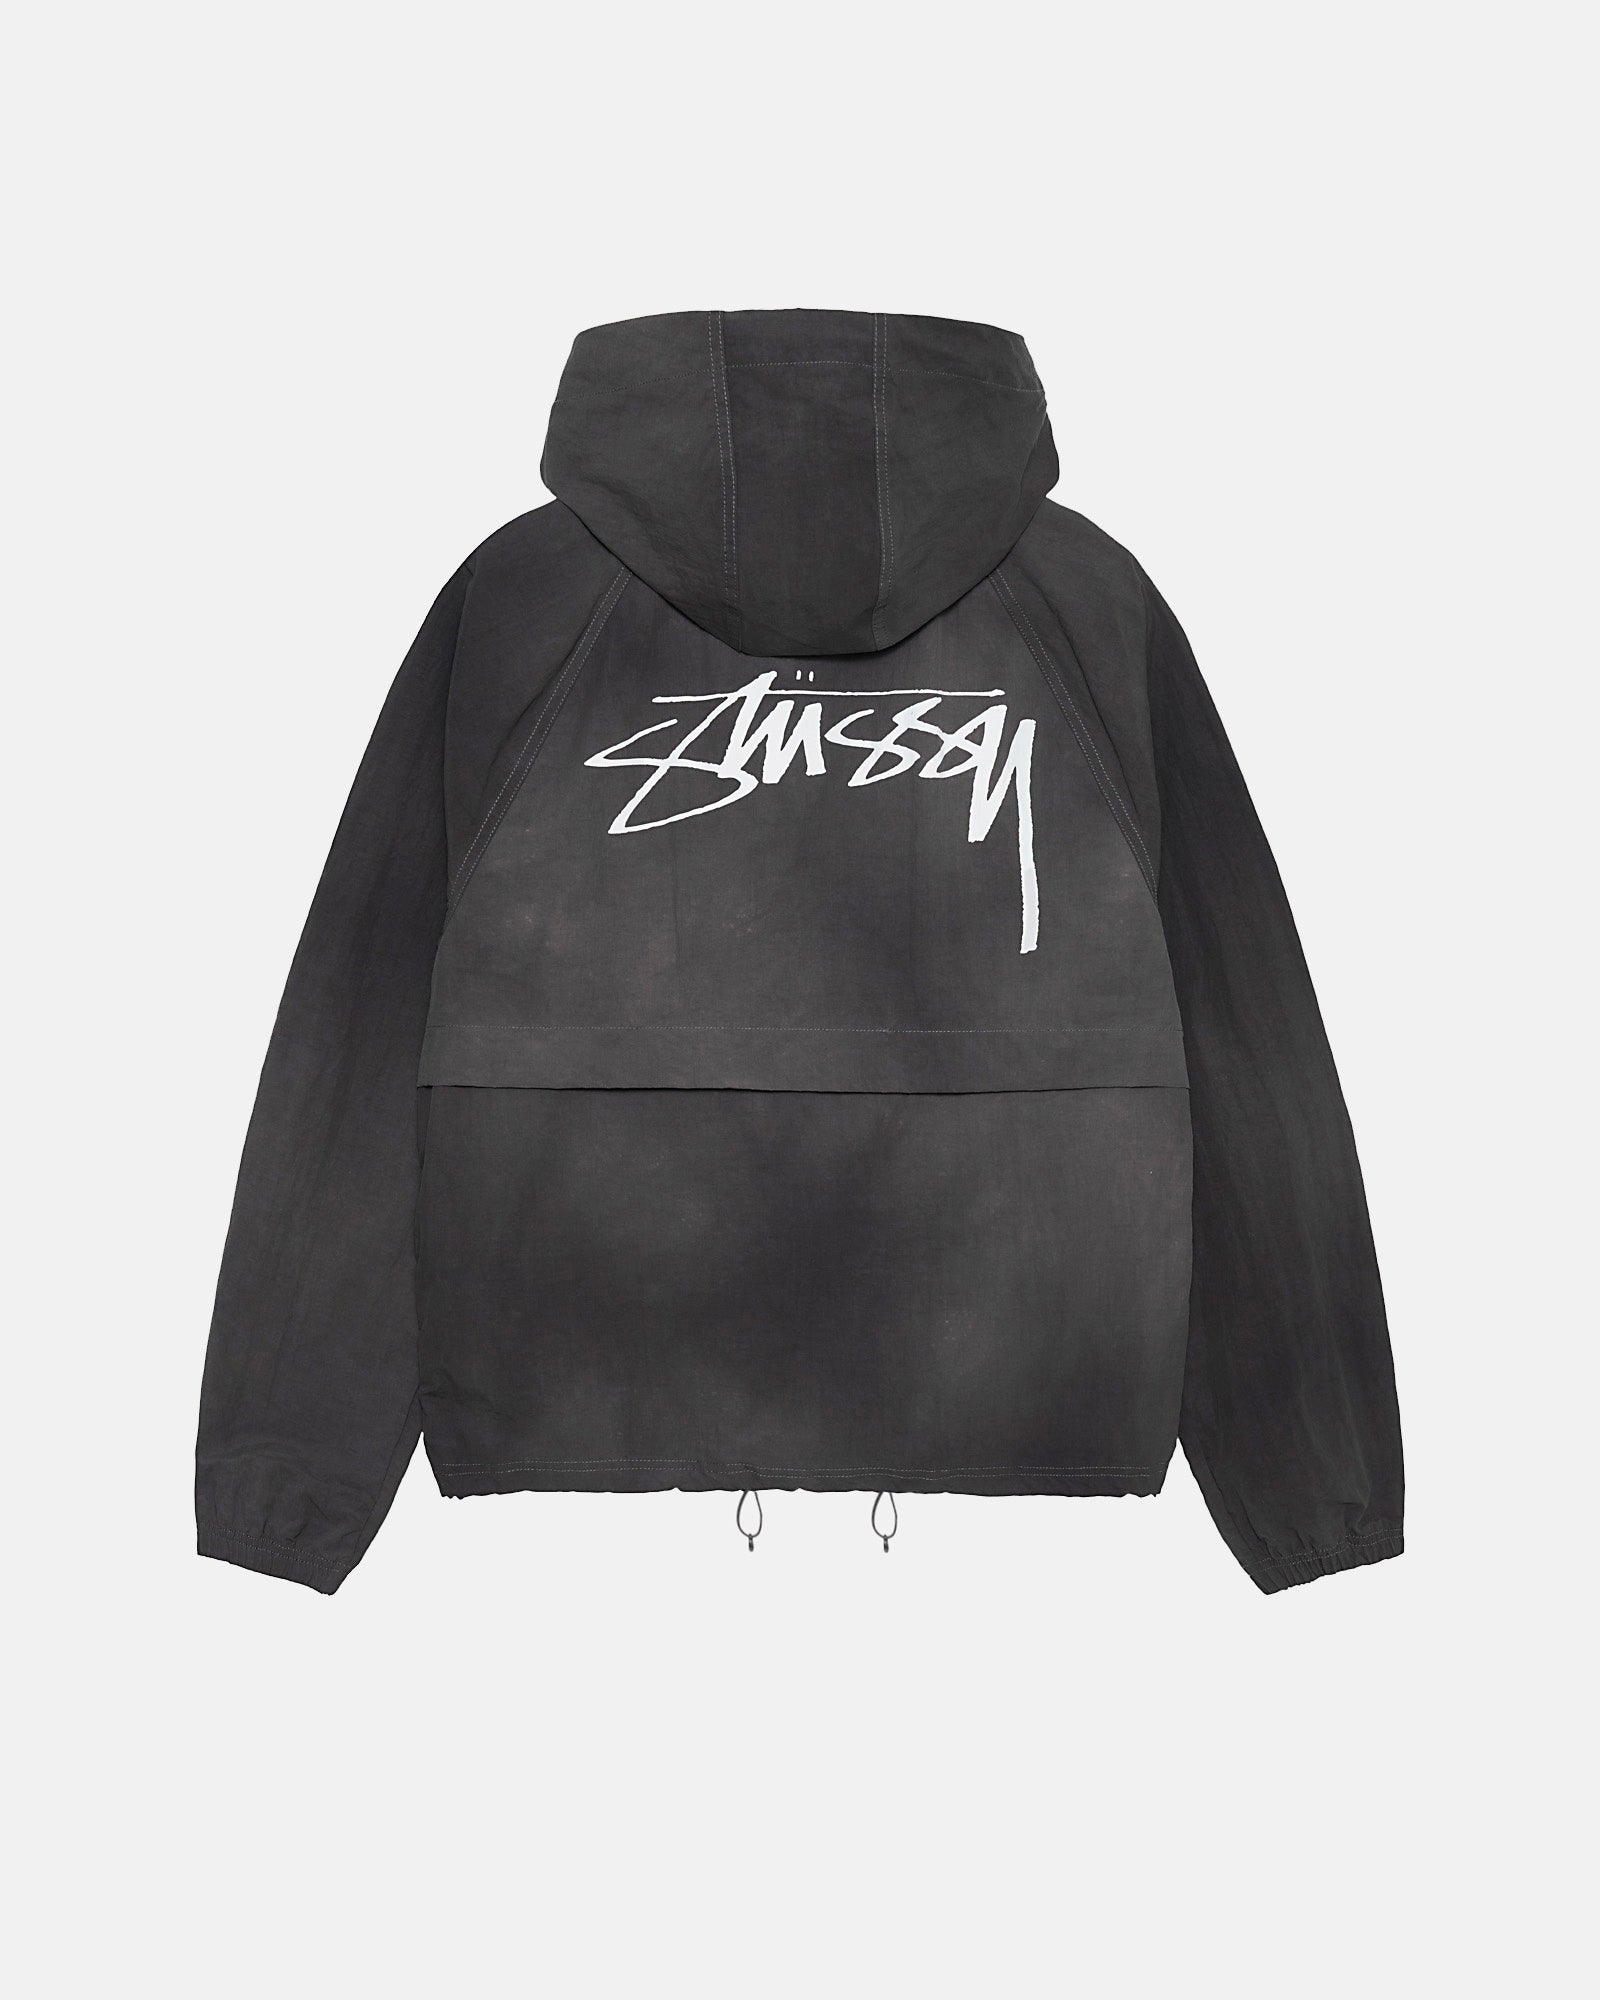 SHOP ALL** DO NOT DELETE / USED FOR SWATCHES – Stüssy Japan